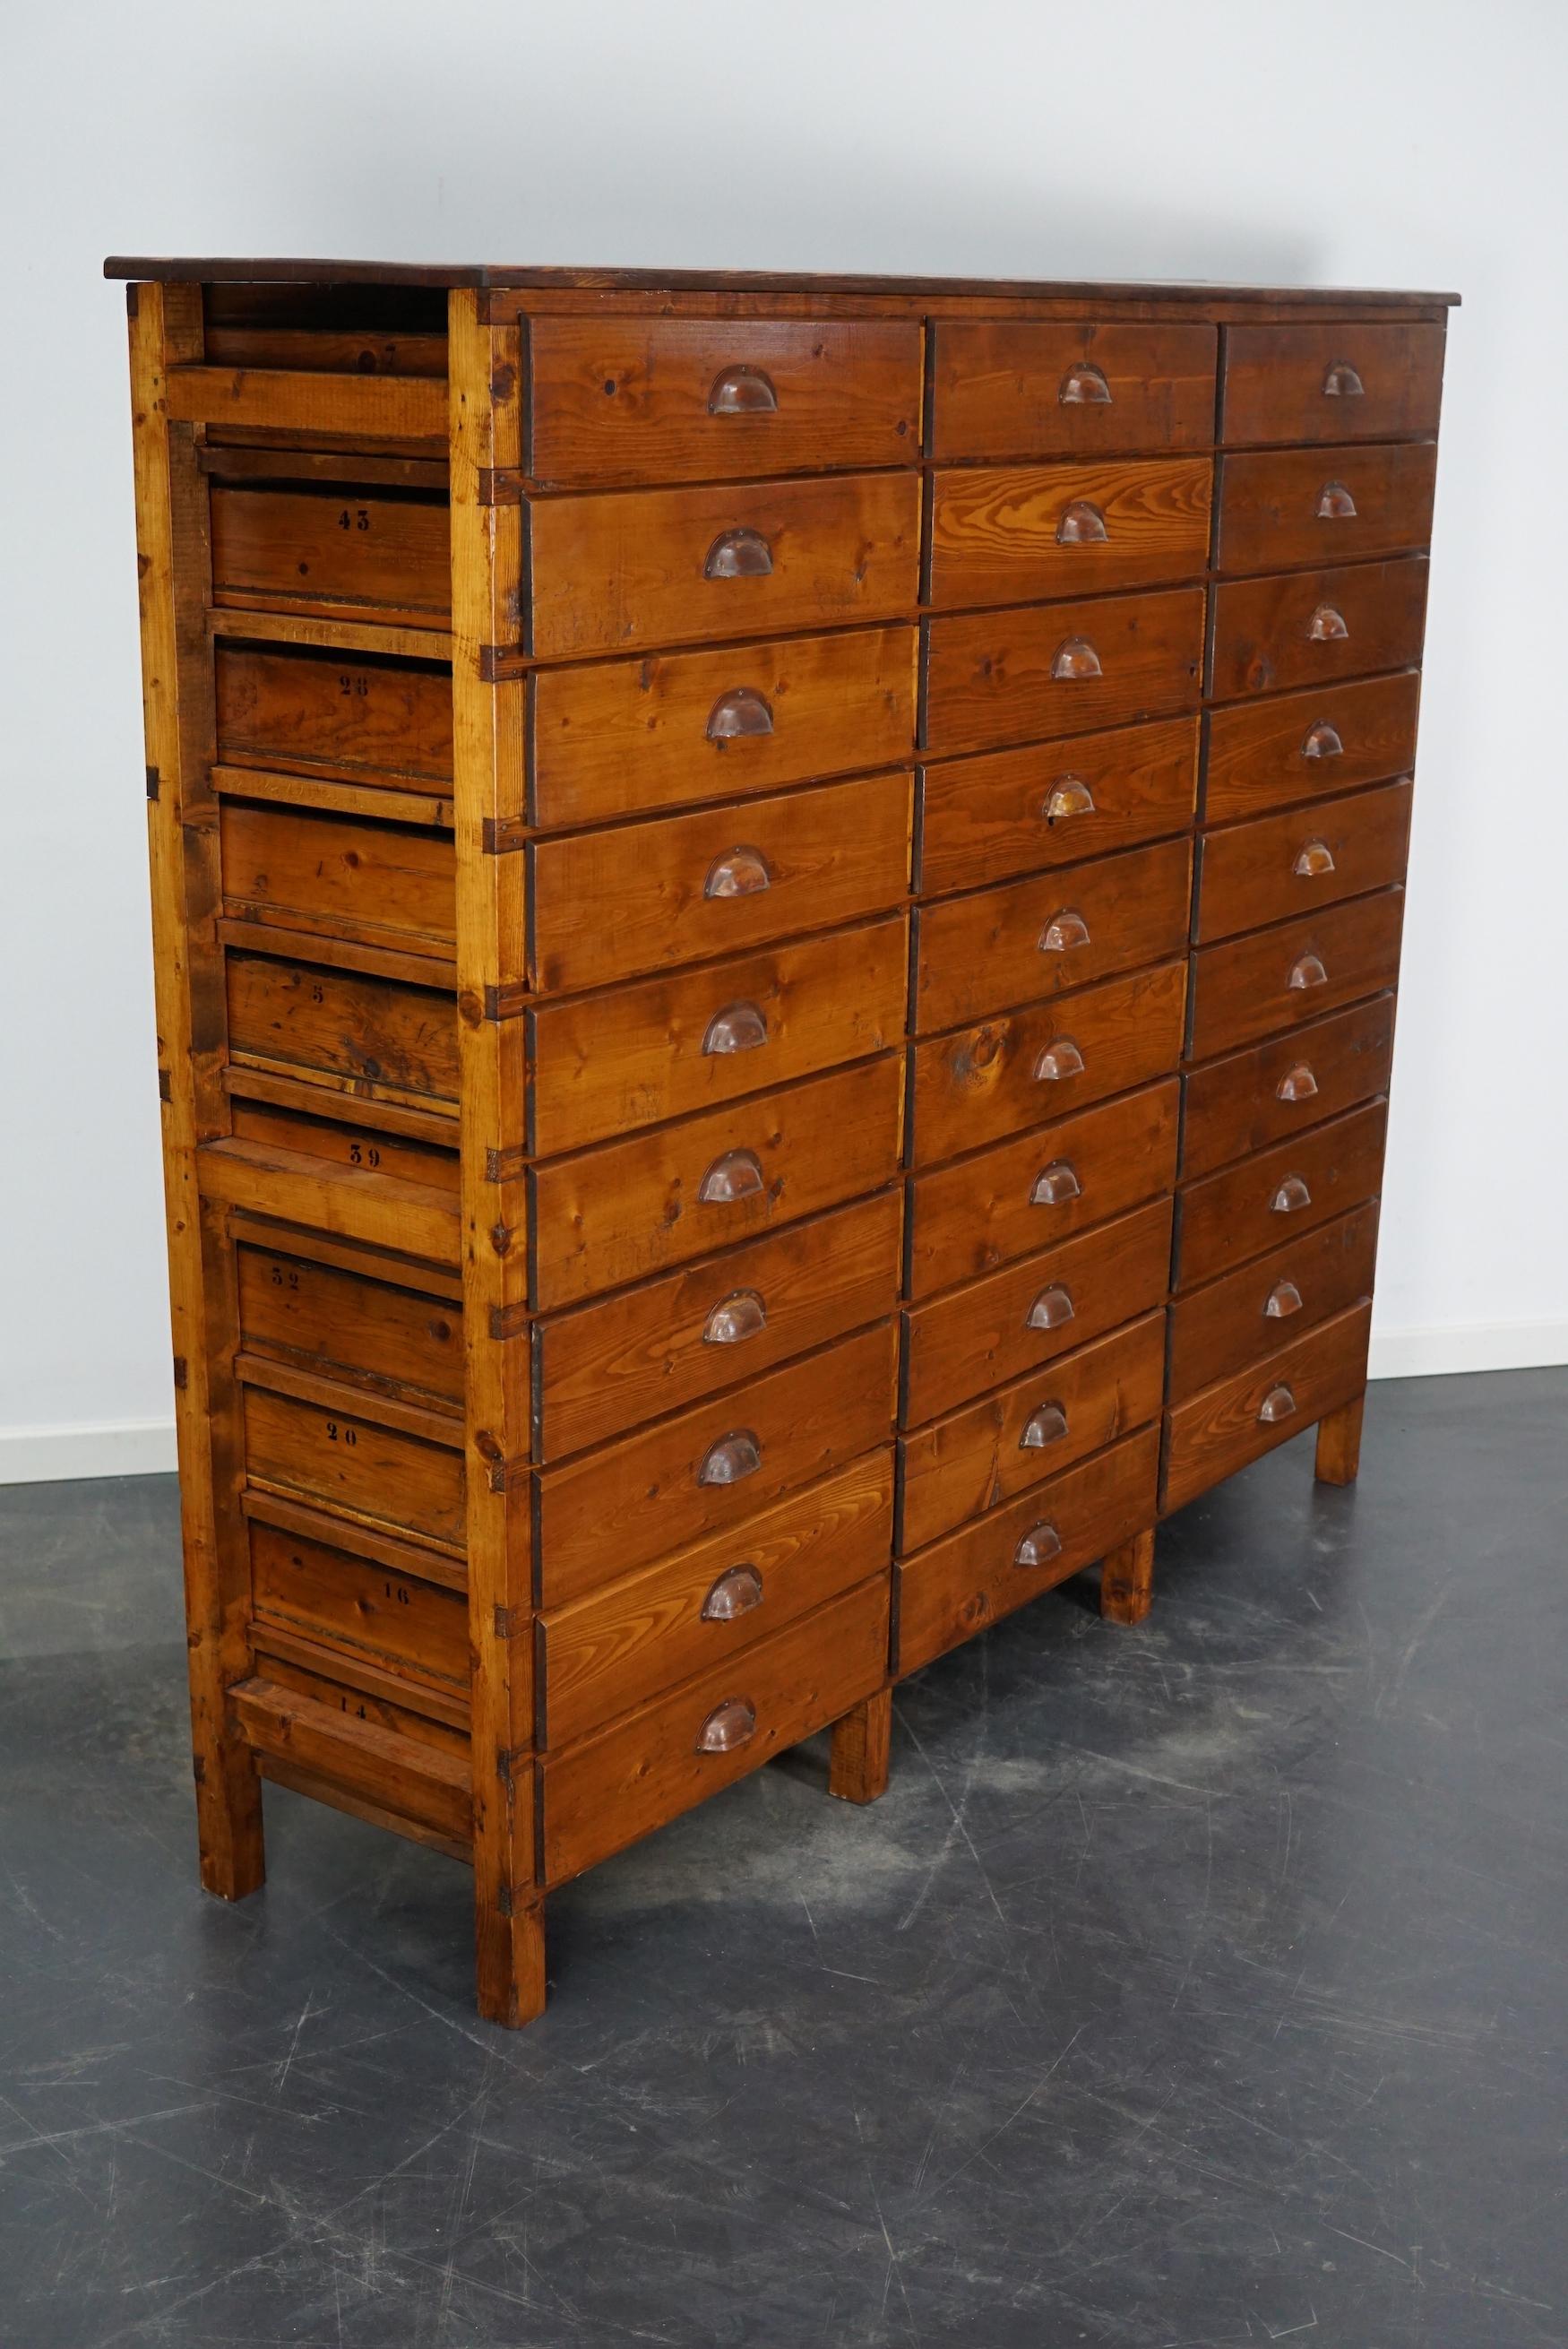 This apothecary cabinet was designed and made from pine circa 1950 in the Netherlands. It features 30 decent sized drawers with metal hardware. The inside of the drawers measure: DWH 38 x 47 x 8.5 cm.